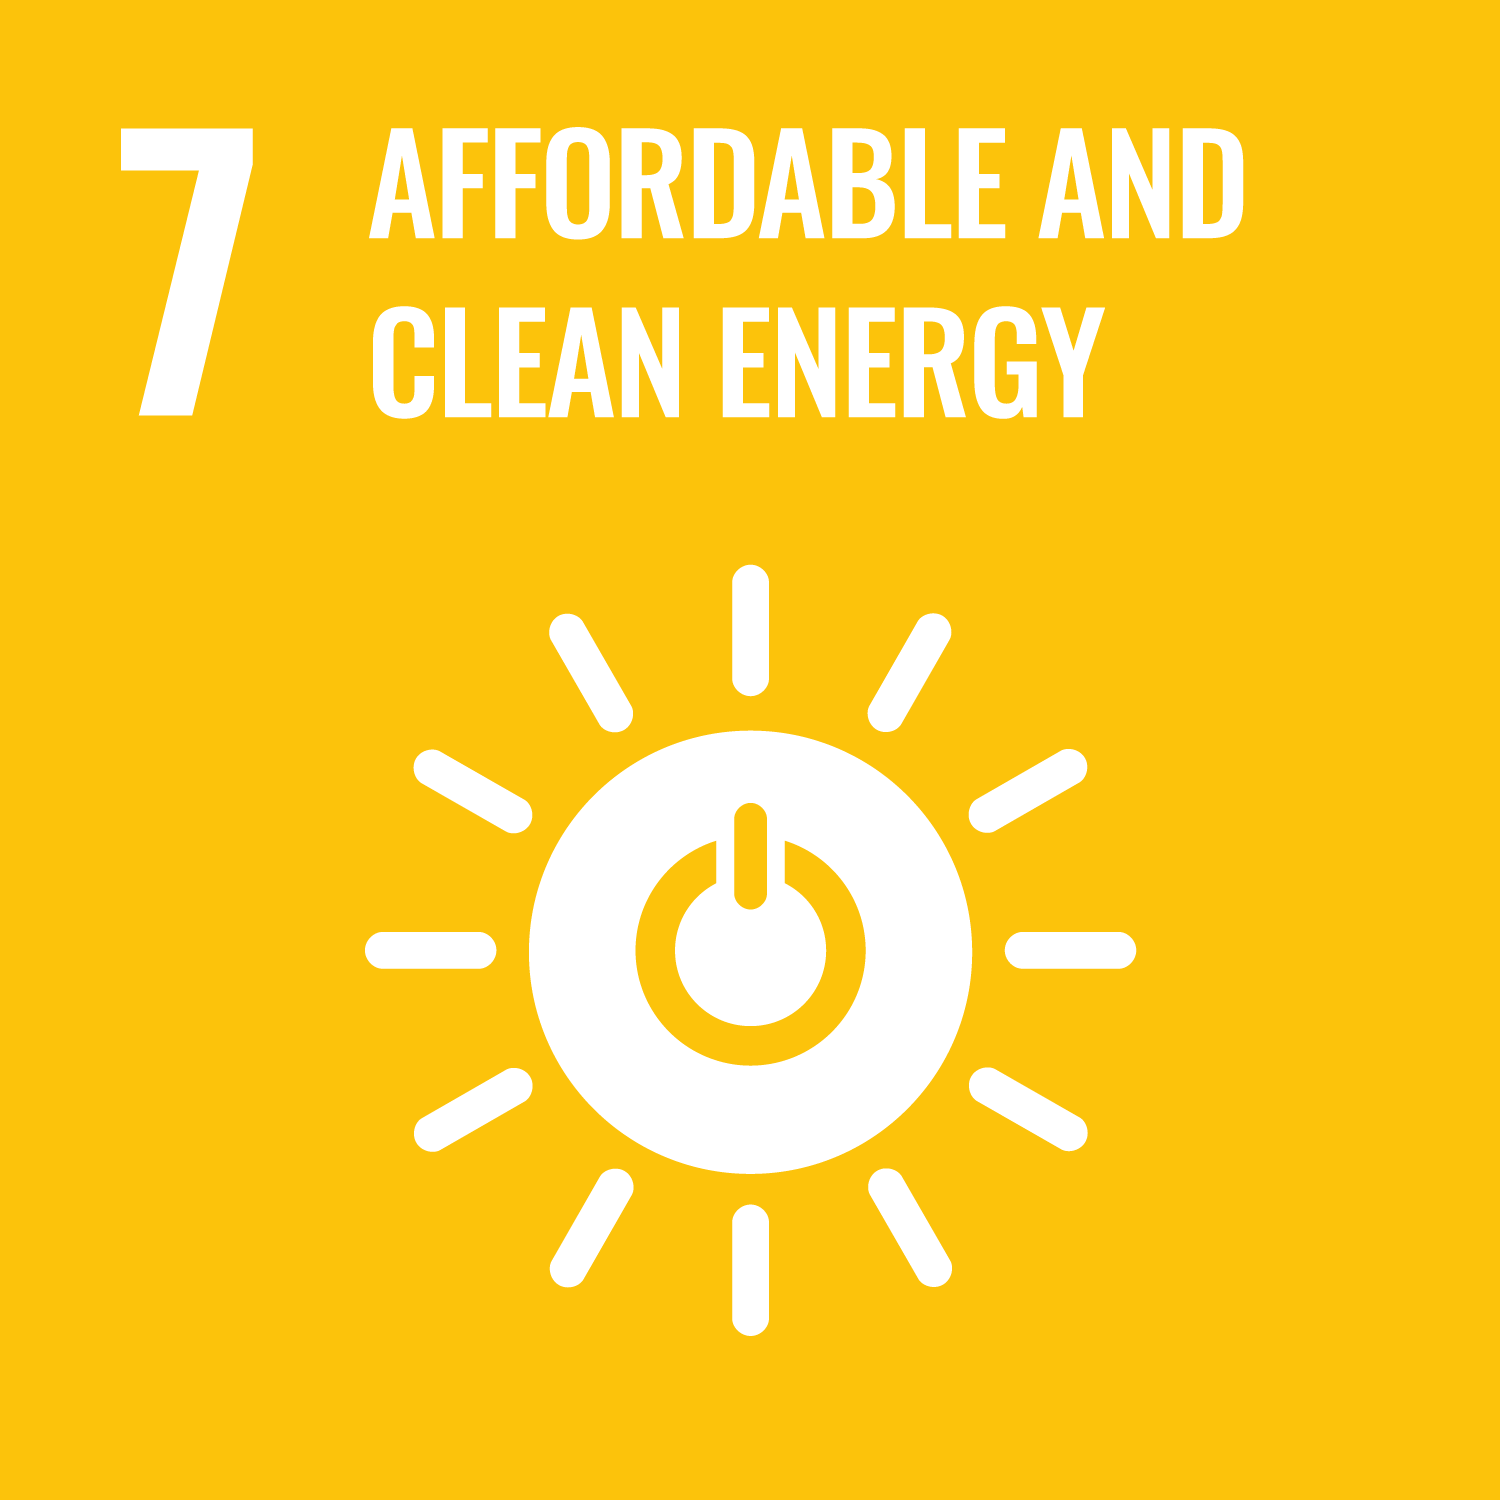 Goal 7 AFFORDABLE AND CLEAN ENERGY